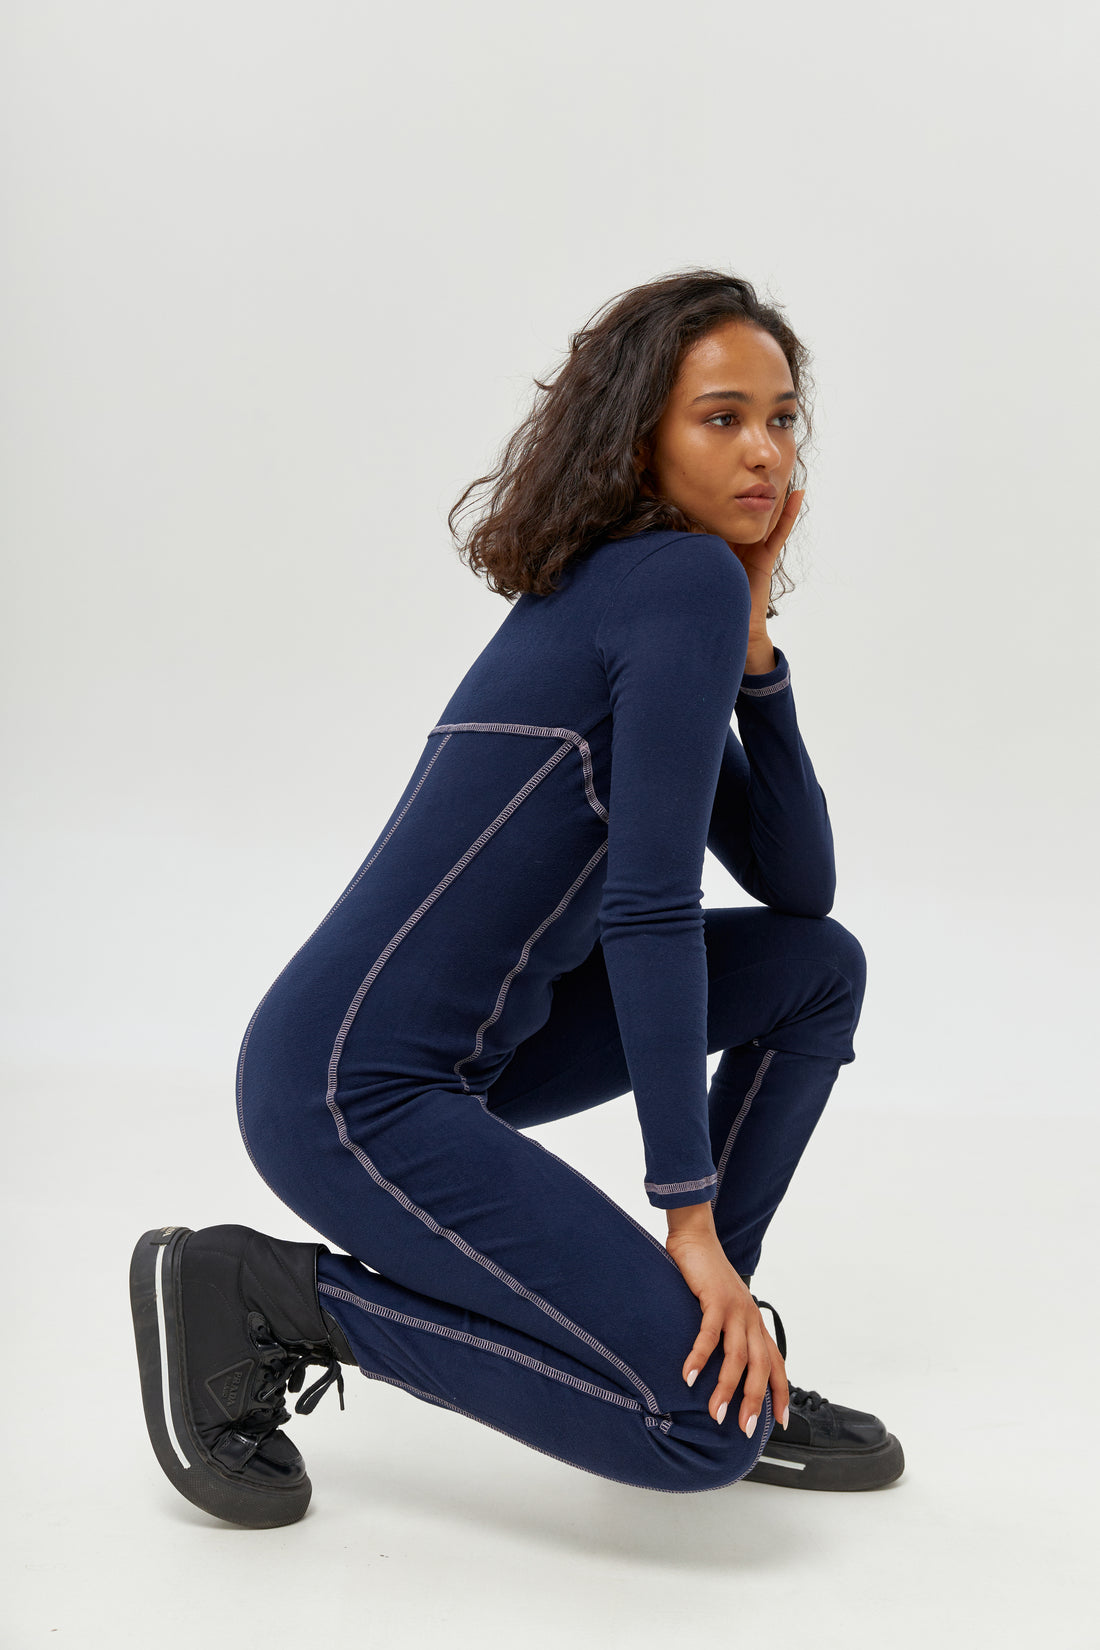 Base layers for skiing women's - Navy blue two piece set for